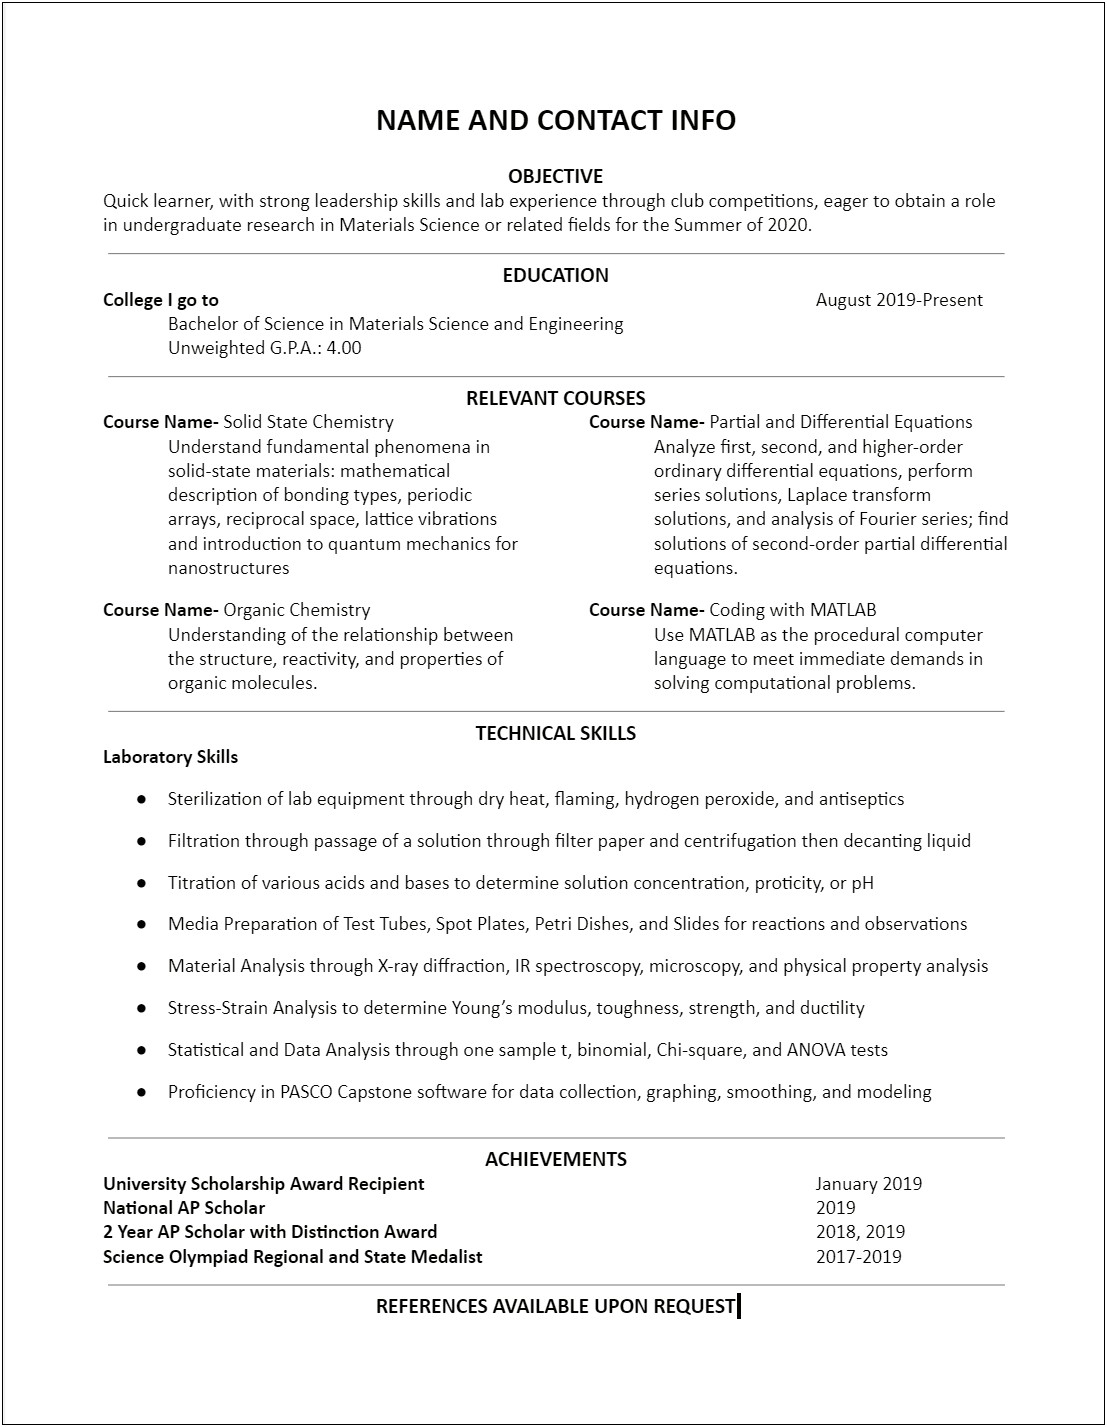 Resume For Undergraduate Research No Experience